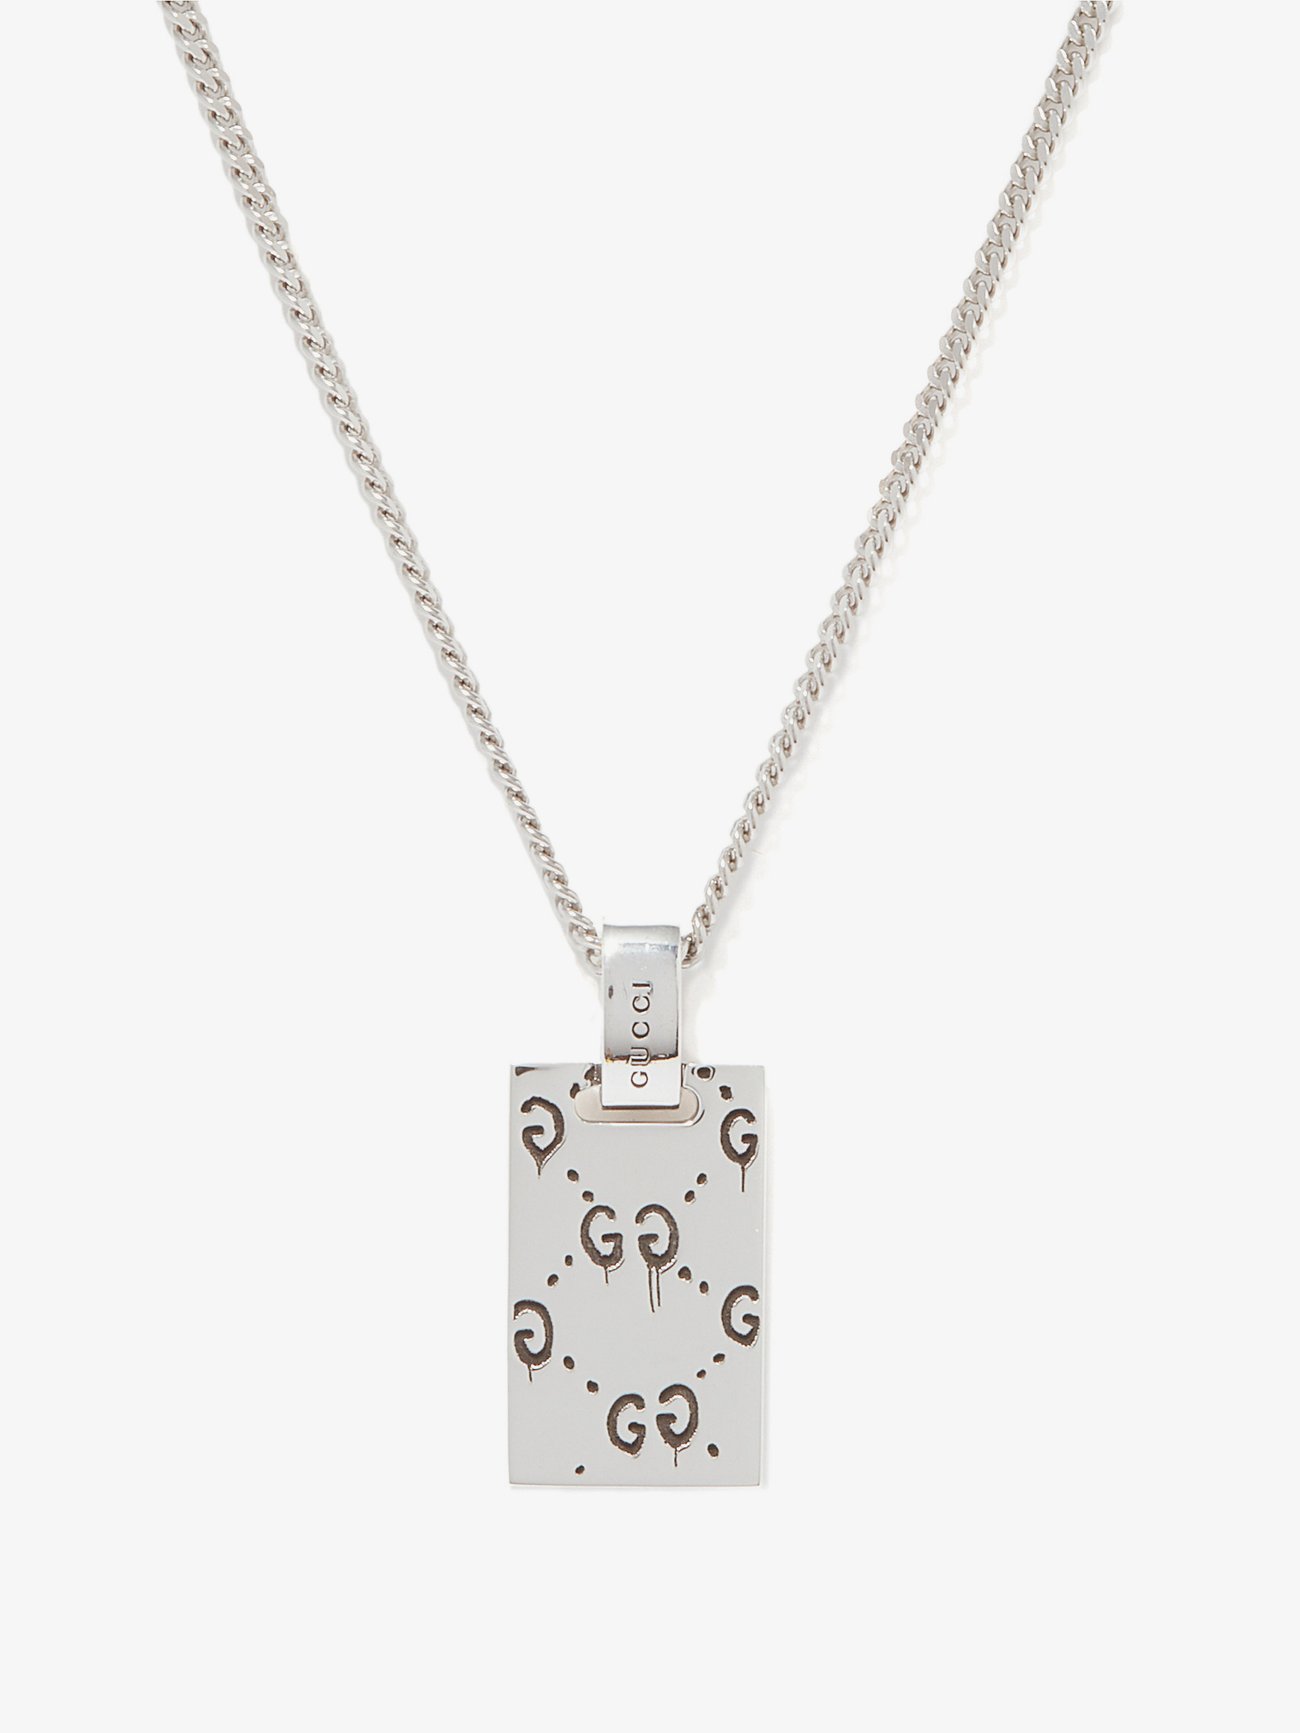 Metallic GucciGhost necklace | Gucci MATCHESFASHION US